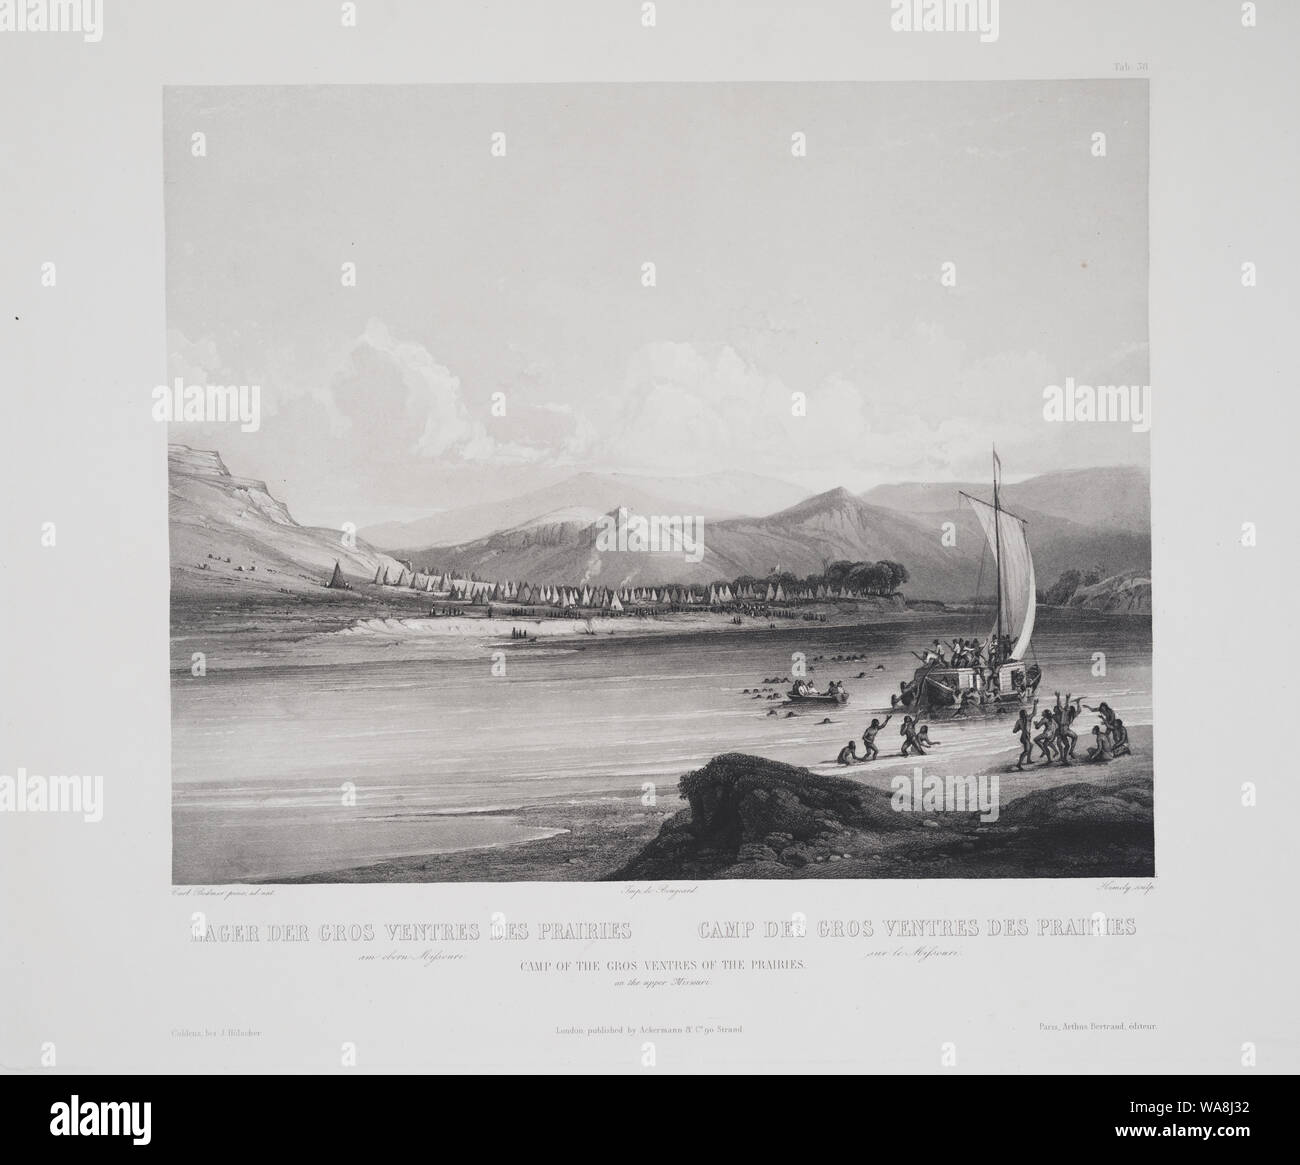 Camp of the Gros Ventres of the prairies on the upper Missouri Abstract: Print shows a large Hidatsa Indians camp in the background; a group of Indians in the foreground are dancing on the shore while others are in the water boarding and attacking passengers on a ship. Stock Photo